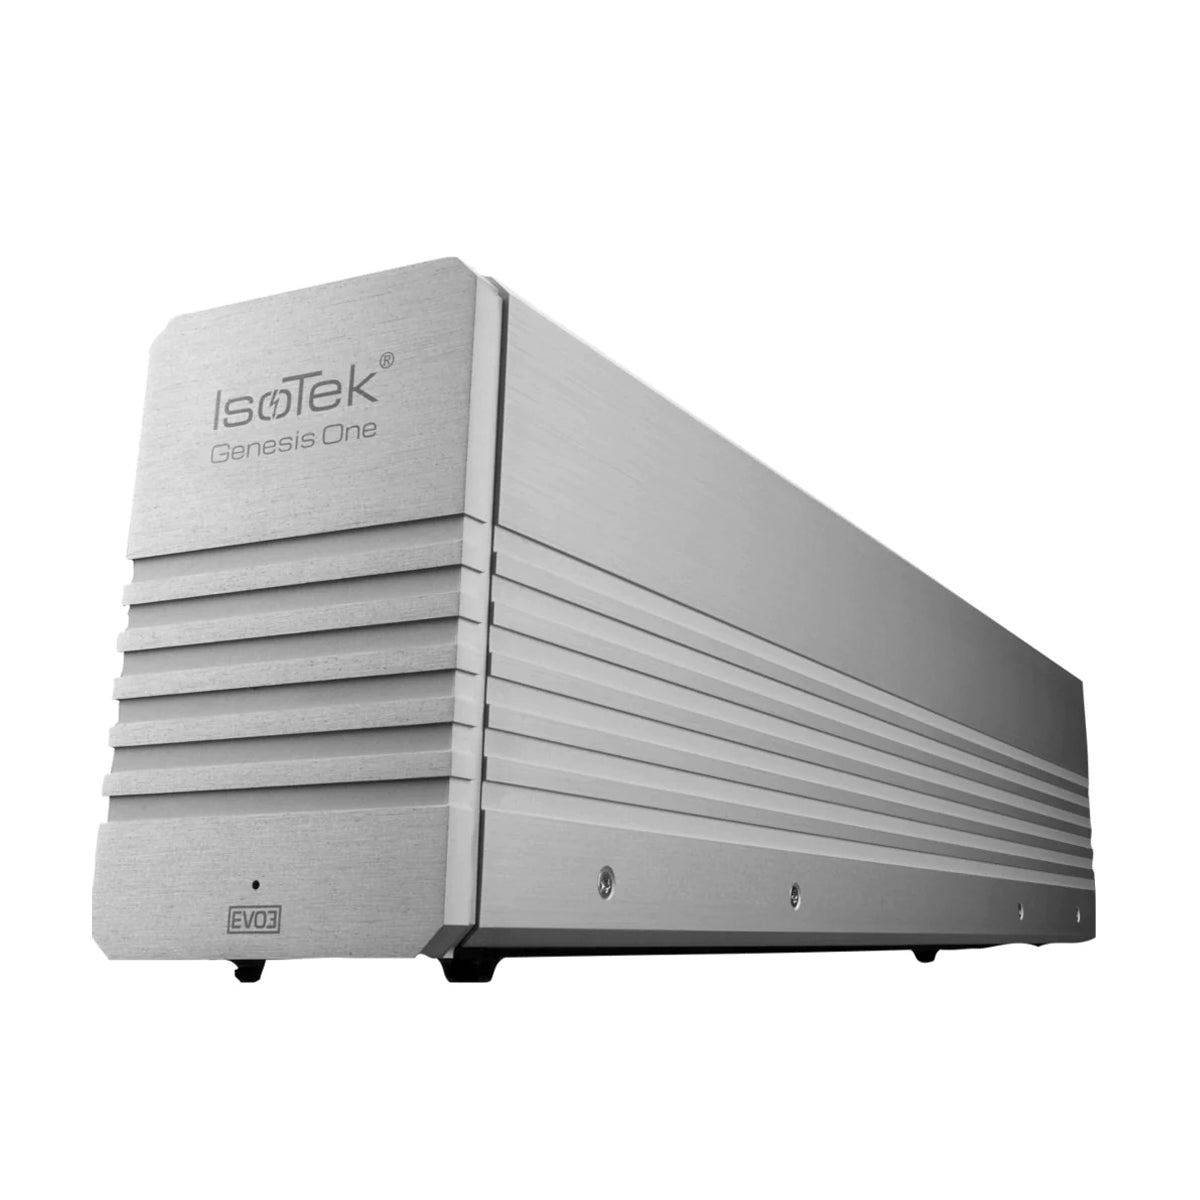 ISOTEK EVO3 Genesis One Power Conditioner without LED Display - Silver